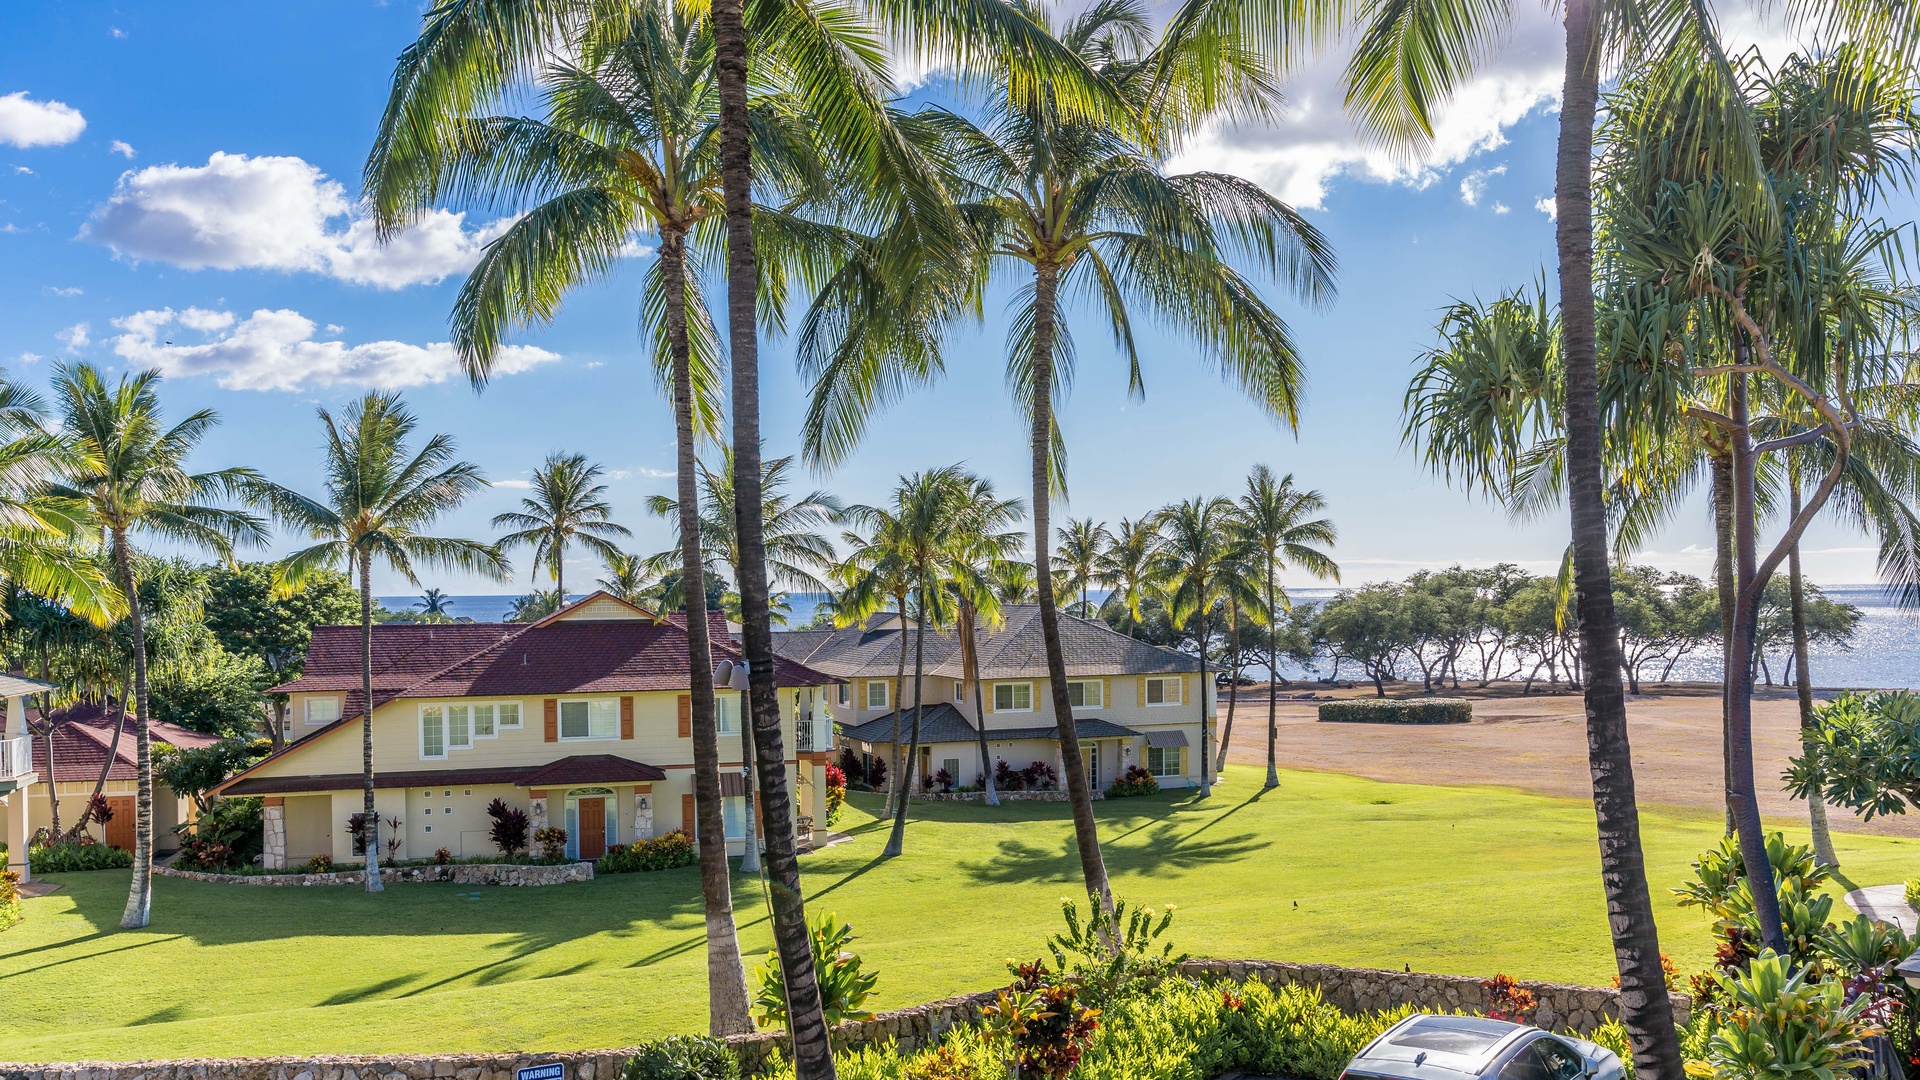 Kapolei Vacation Rentals, Kai Lani 16C - Another image of a lovely island day for golfing, swimming and relaxing.